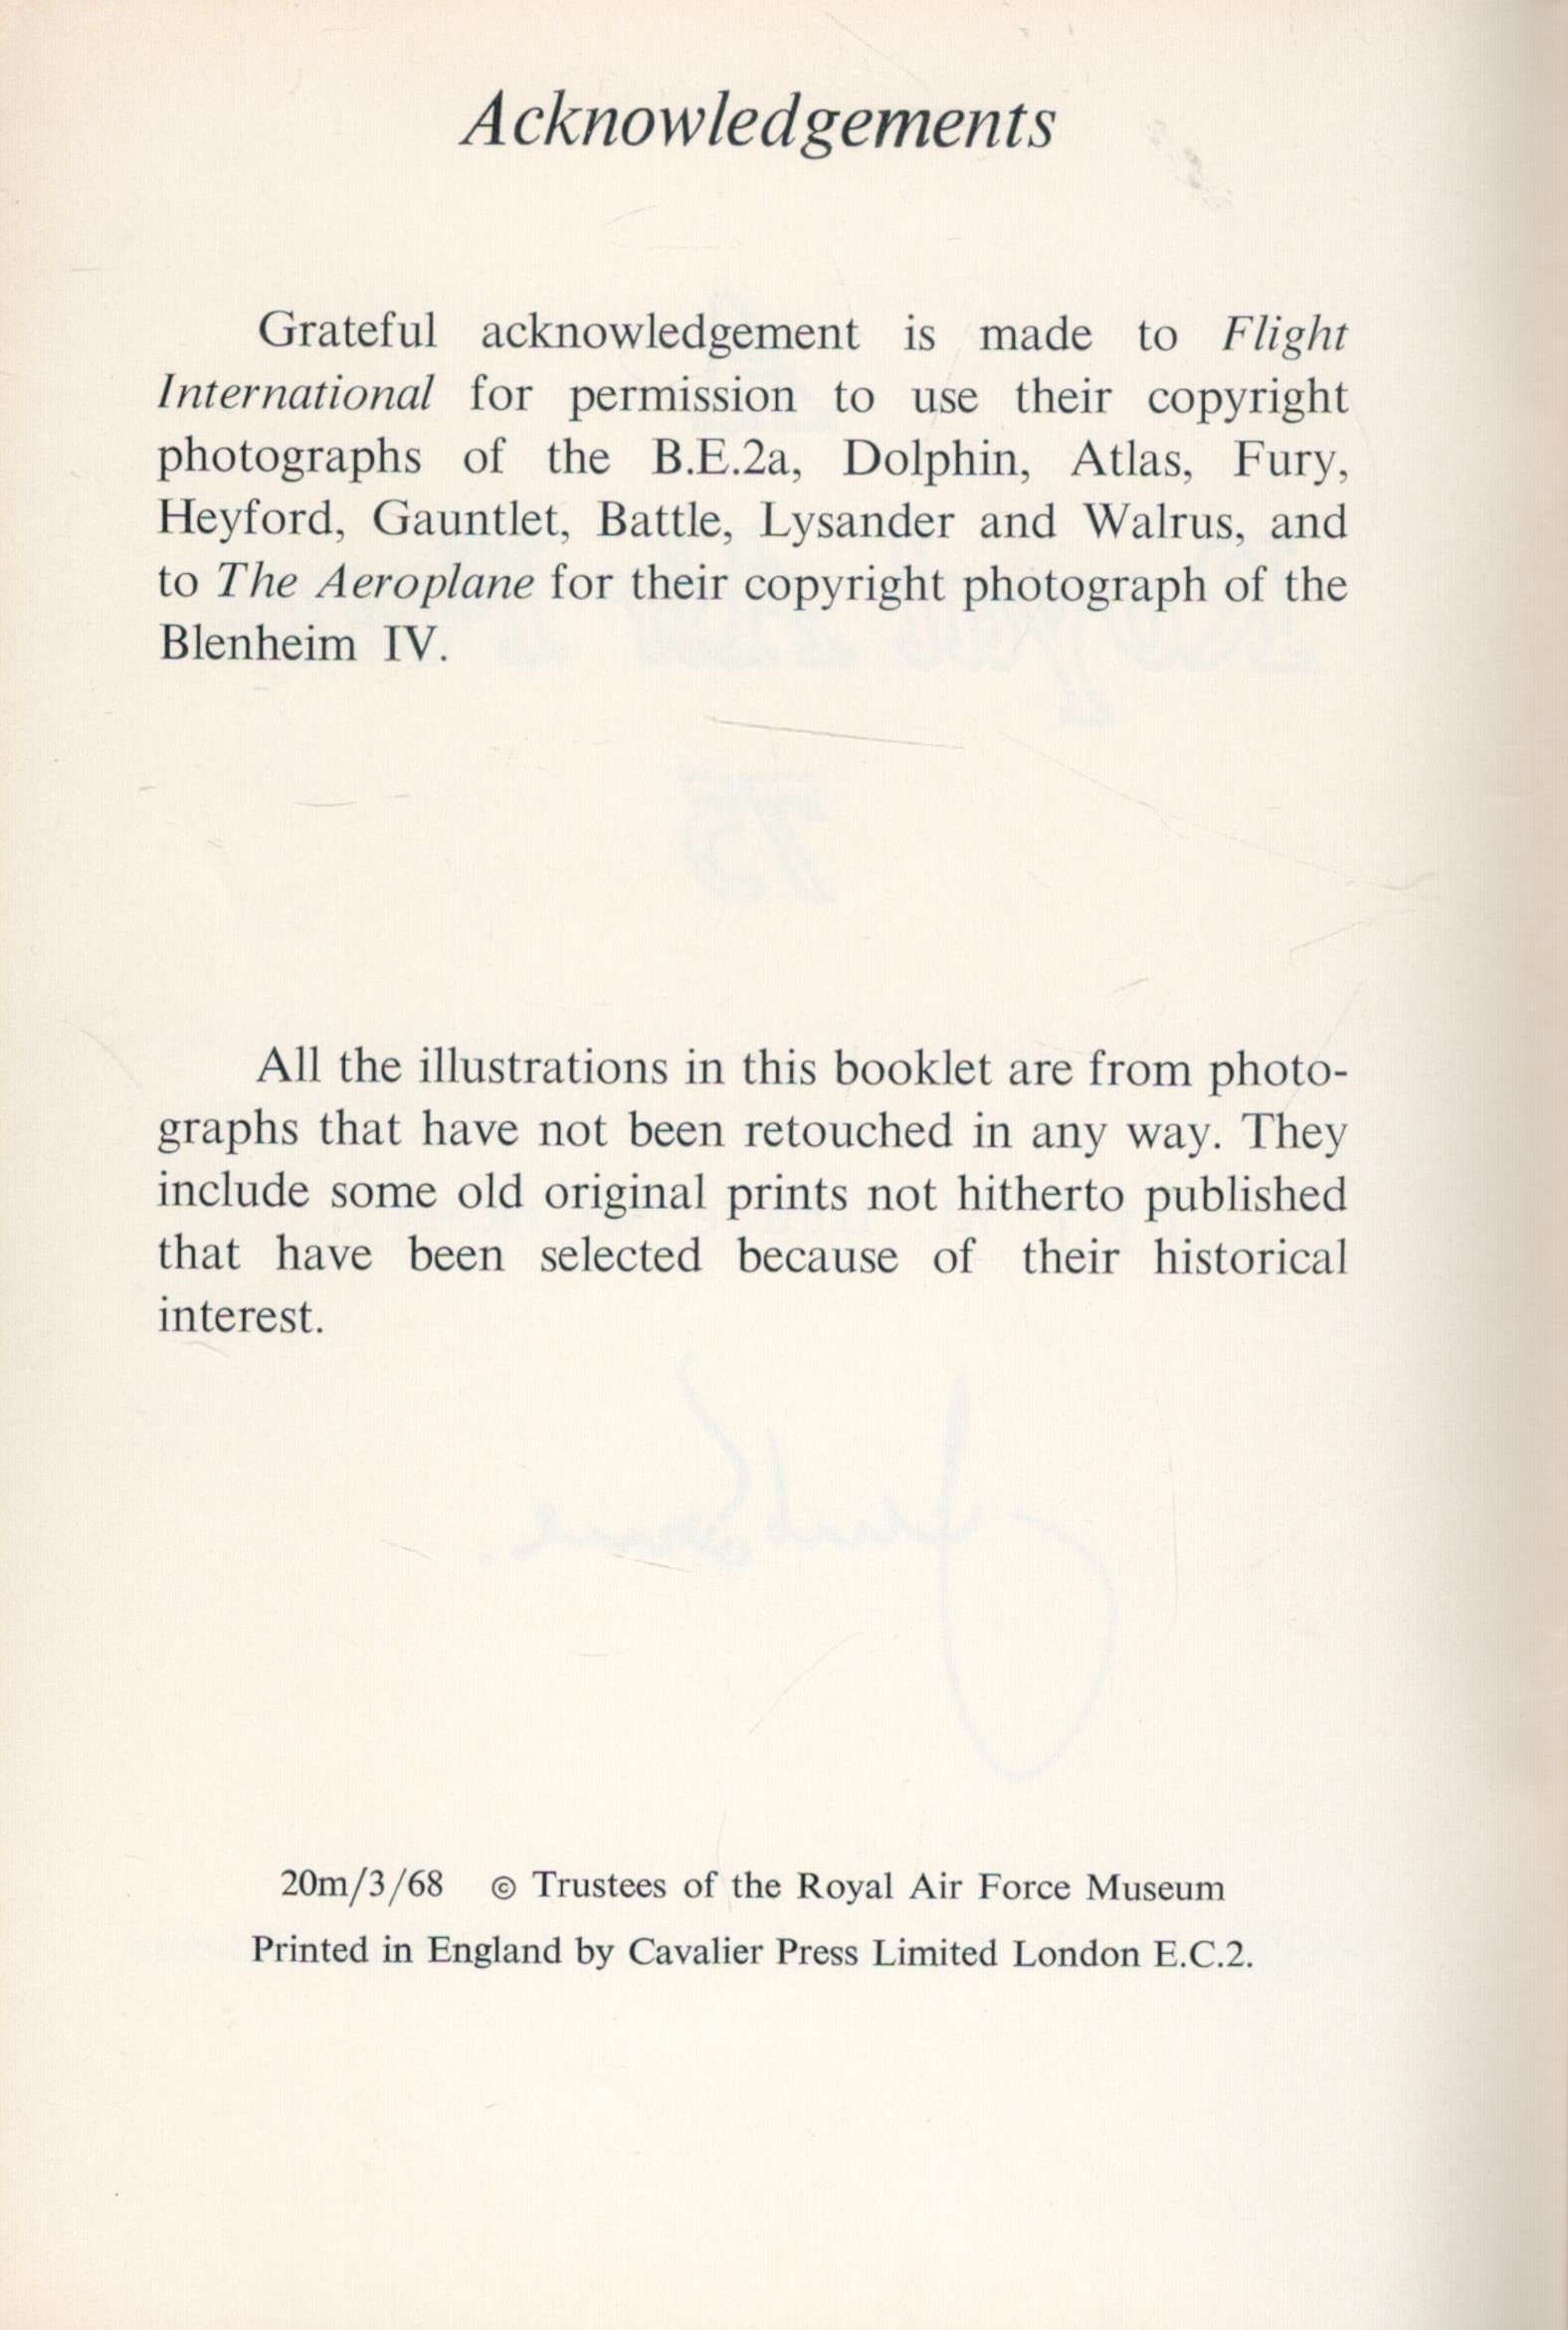 J. M. Bruce. A Royal Air Force 75. a WW2 paperback book in fair condition. Signed by the author. - Image 3 of 3